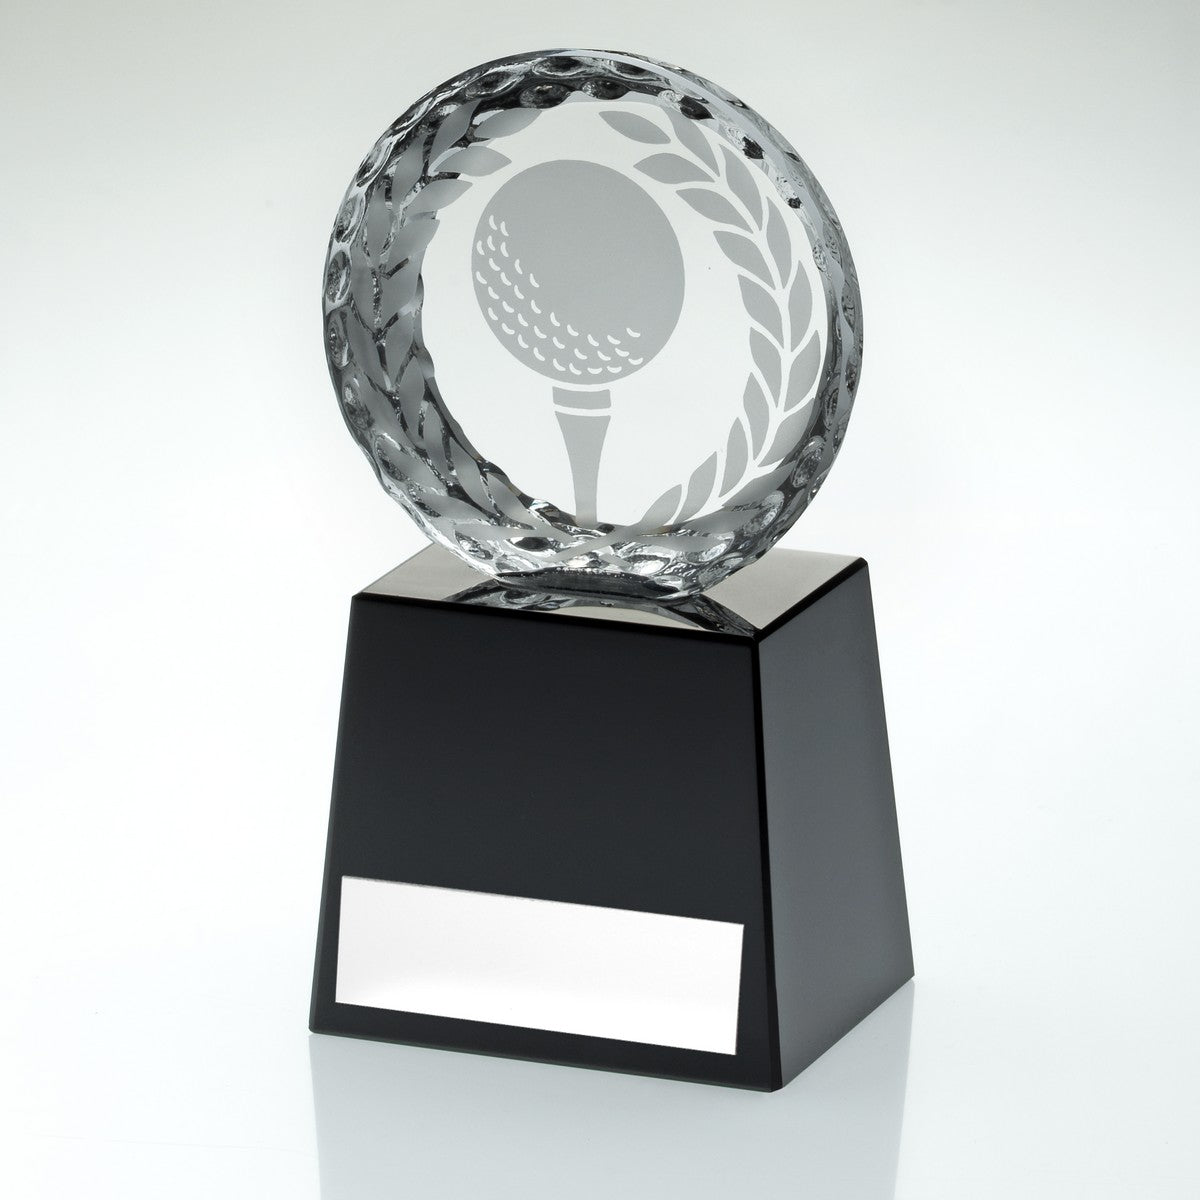 Clear Glass Golf Award - Engraved Plaque on Black Plinth